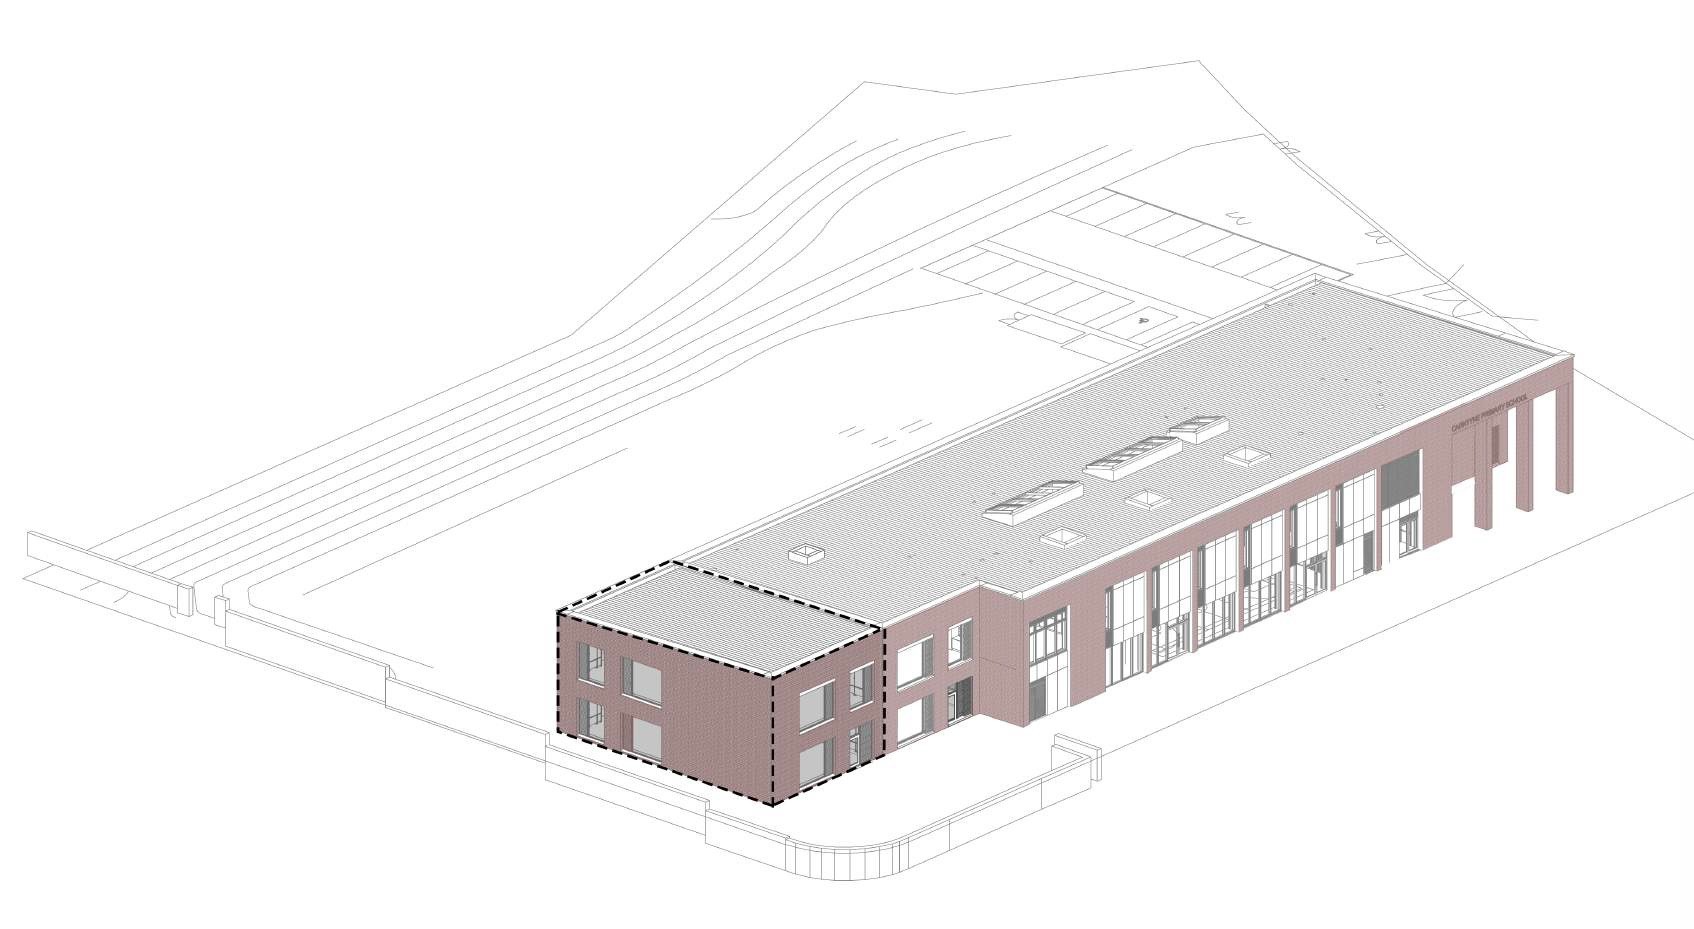 Two-storey extension sought for Glasgow primary school